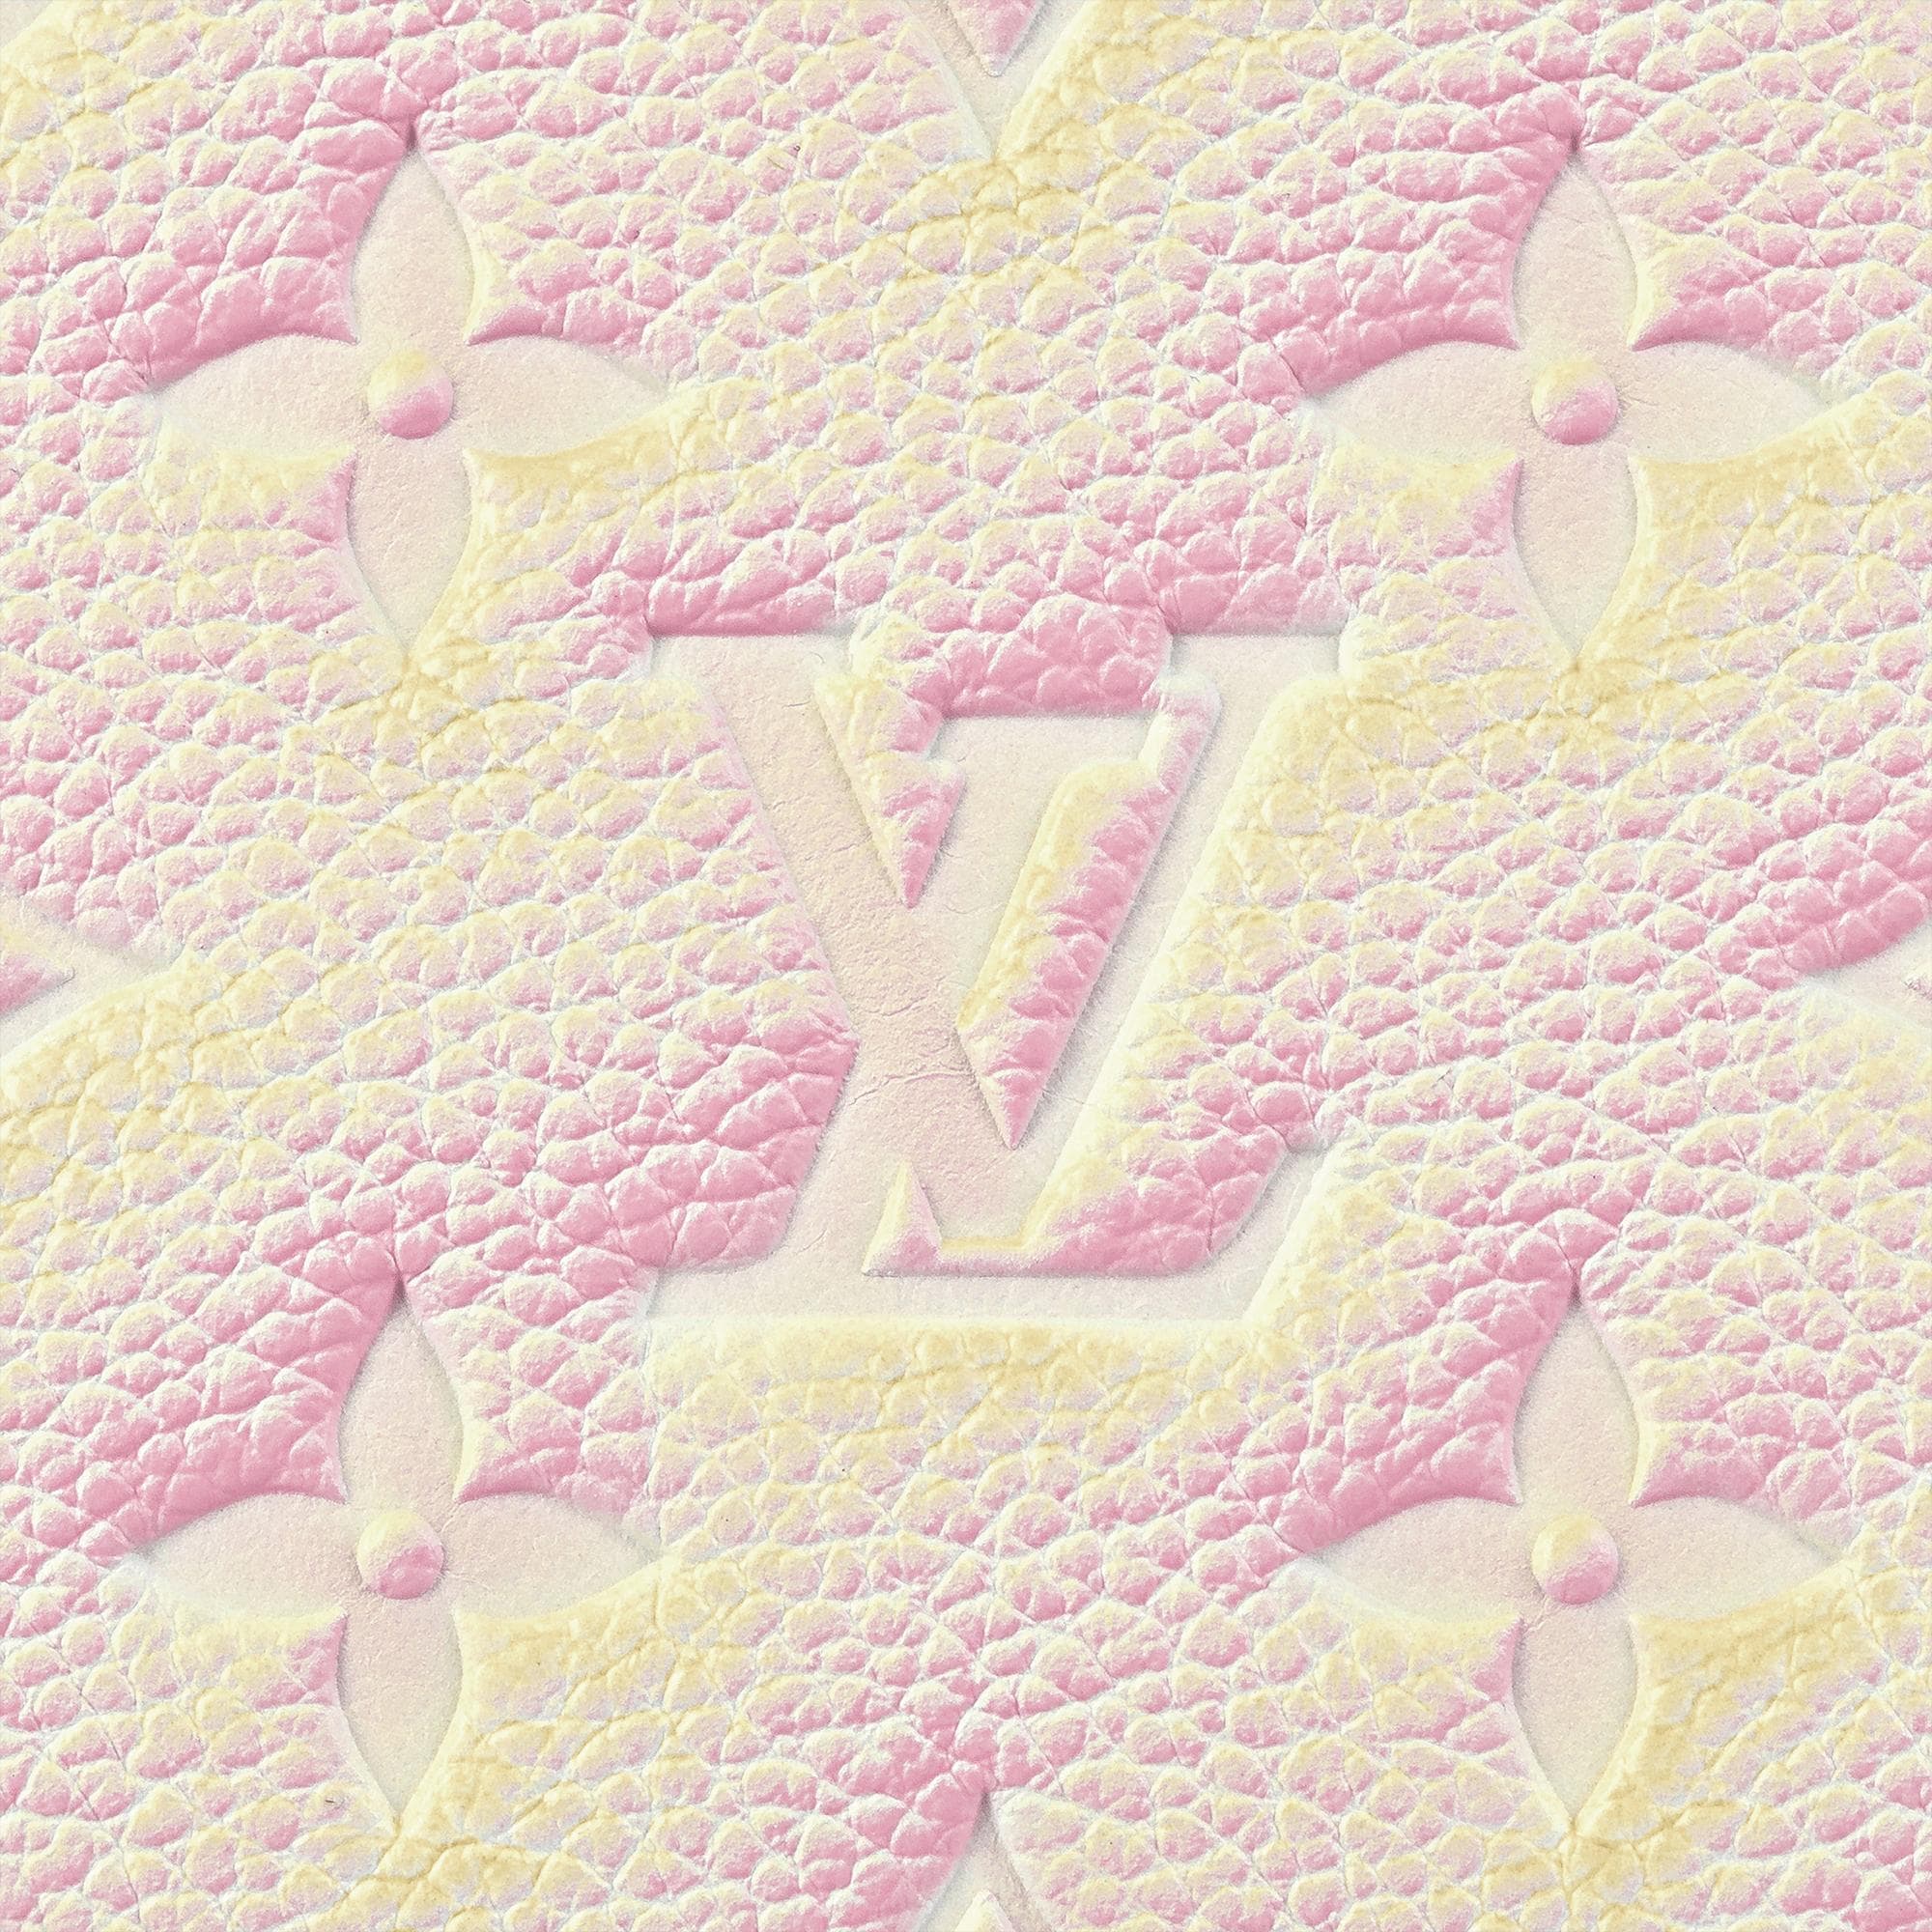 LOUIS VUITTON On The Go PM Monogram Implant 2WAY Tote Bag Light Pink M46168